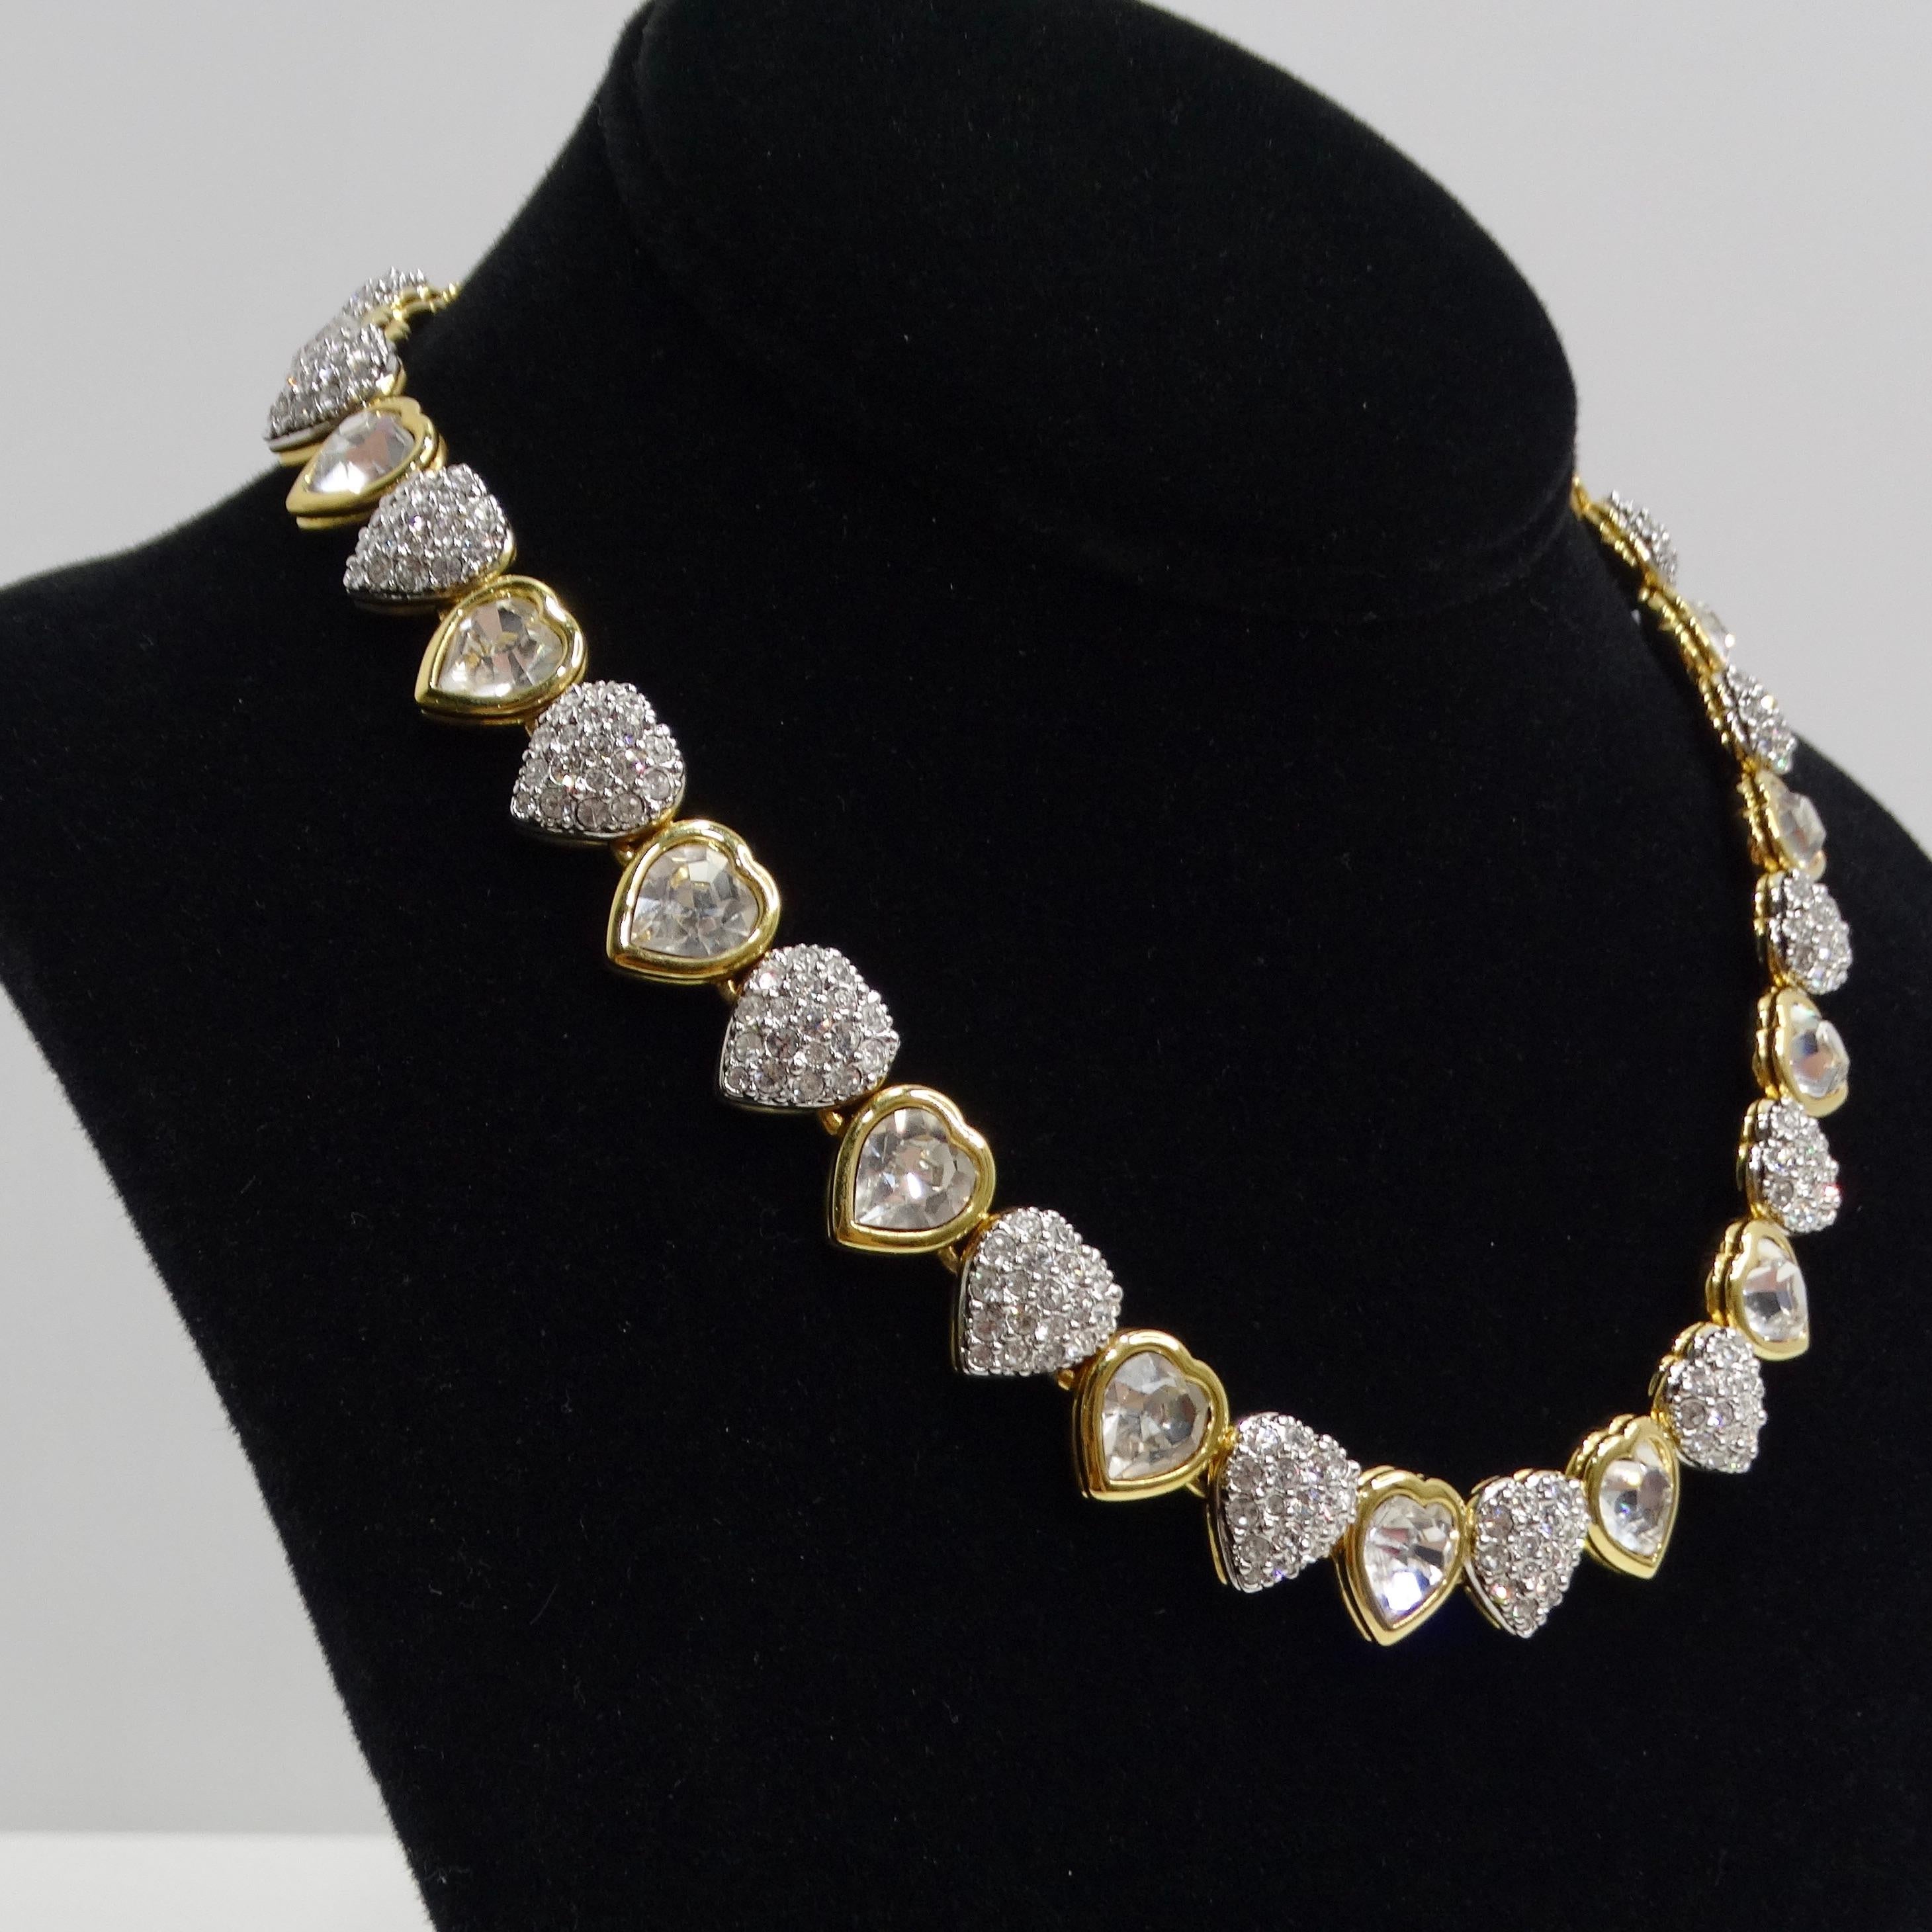 The Swarovski Vintage 14K Gold Plated Crystal Heart Choker is a glamorous and eye-catching piece from the 1980s that embodies the elegance and sparkle associated with Swarovski crystals. This choker-style necklace features a series of heart-shaped